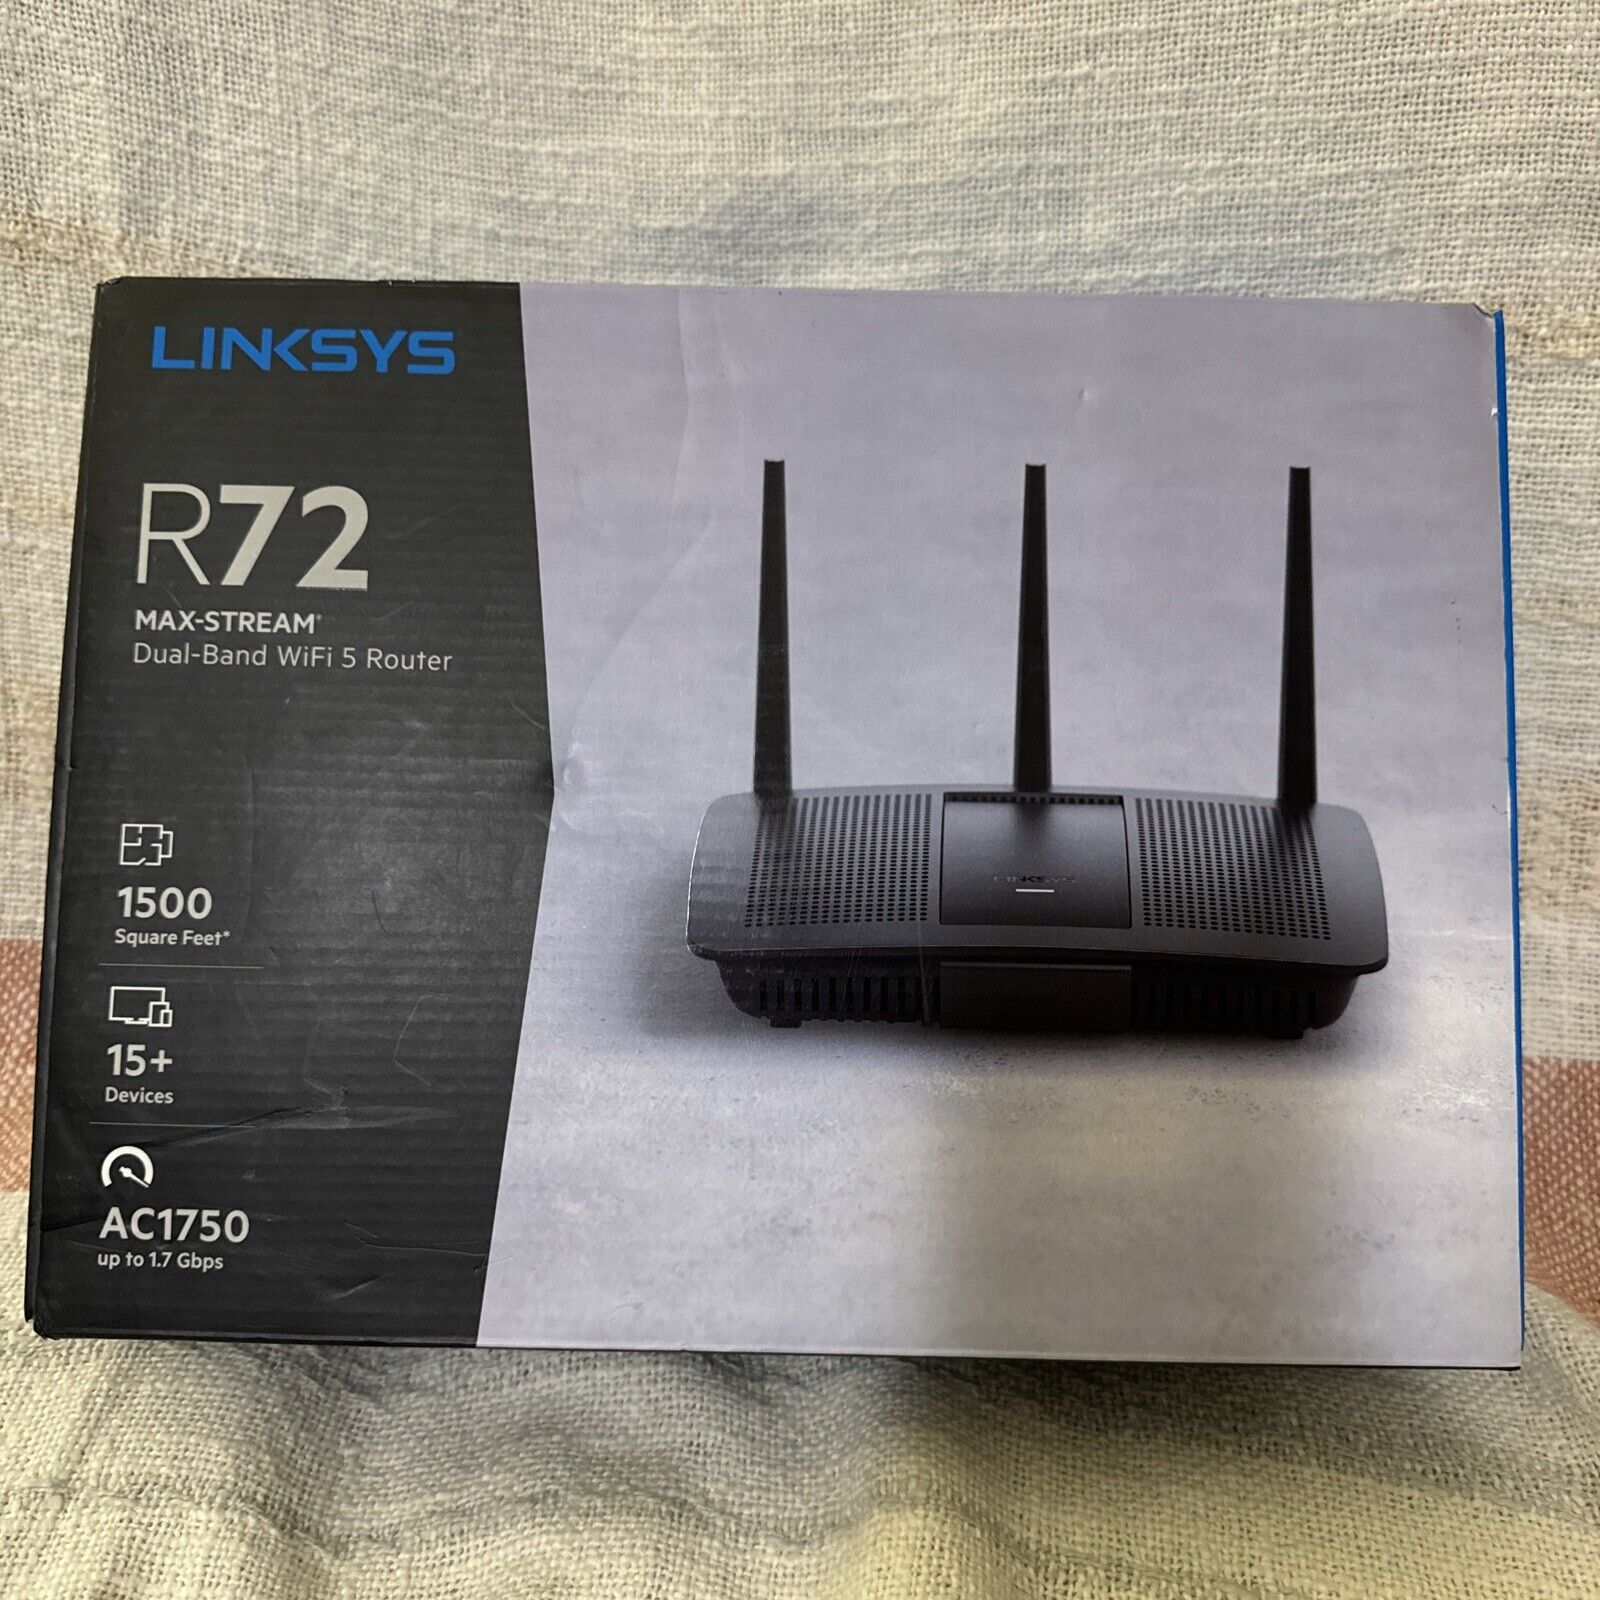 NEW Open Box  Linksys R72 Max Stream Dual Band WiFi 5 Router AC1750